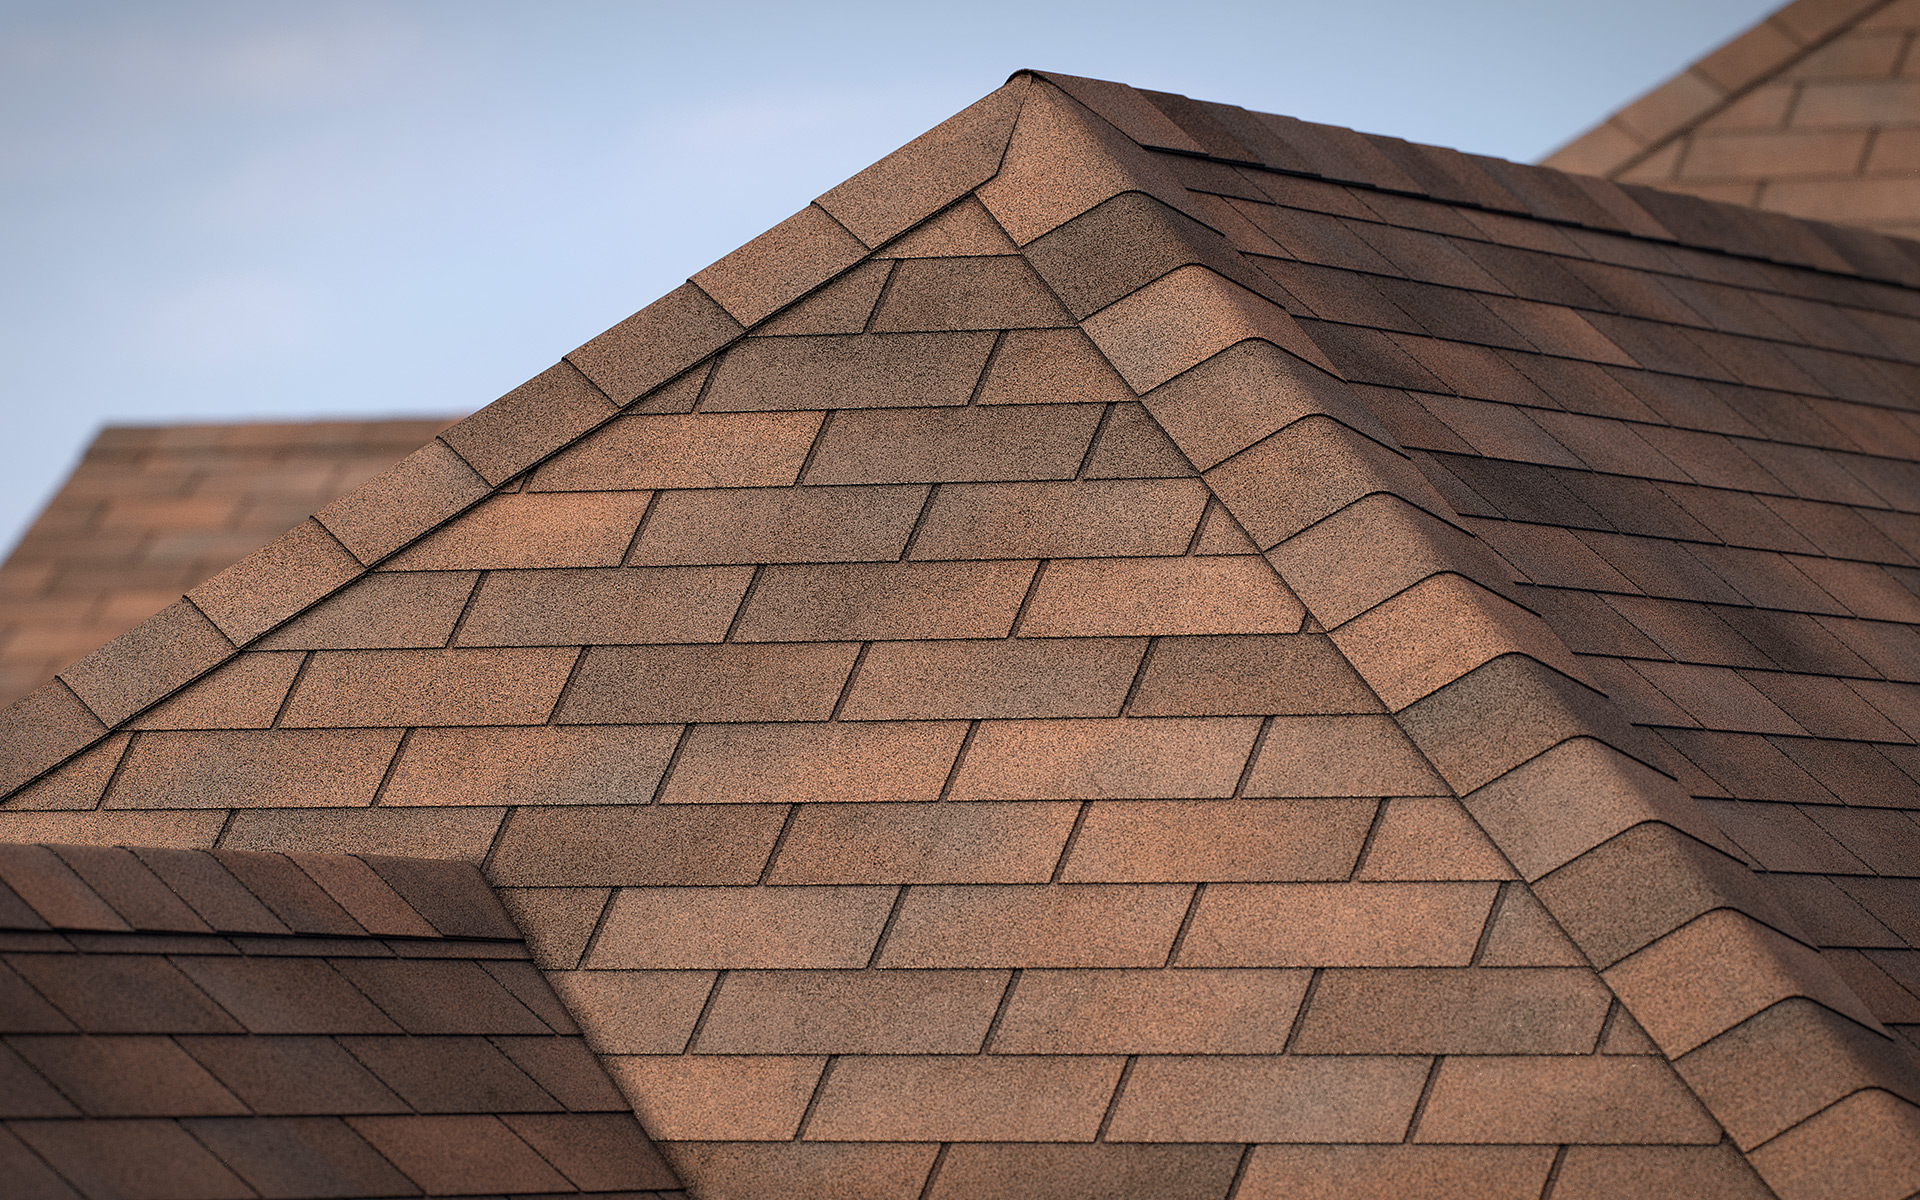 3-tab asphalt roof shingles rustic color 3D model preset for 3dsmax and RailClone. Rendered with vray, made for arch-viz.